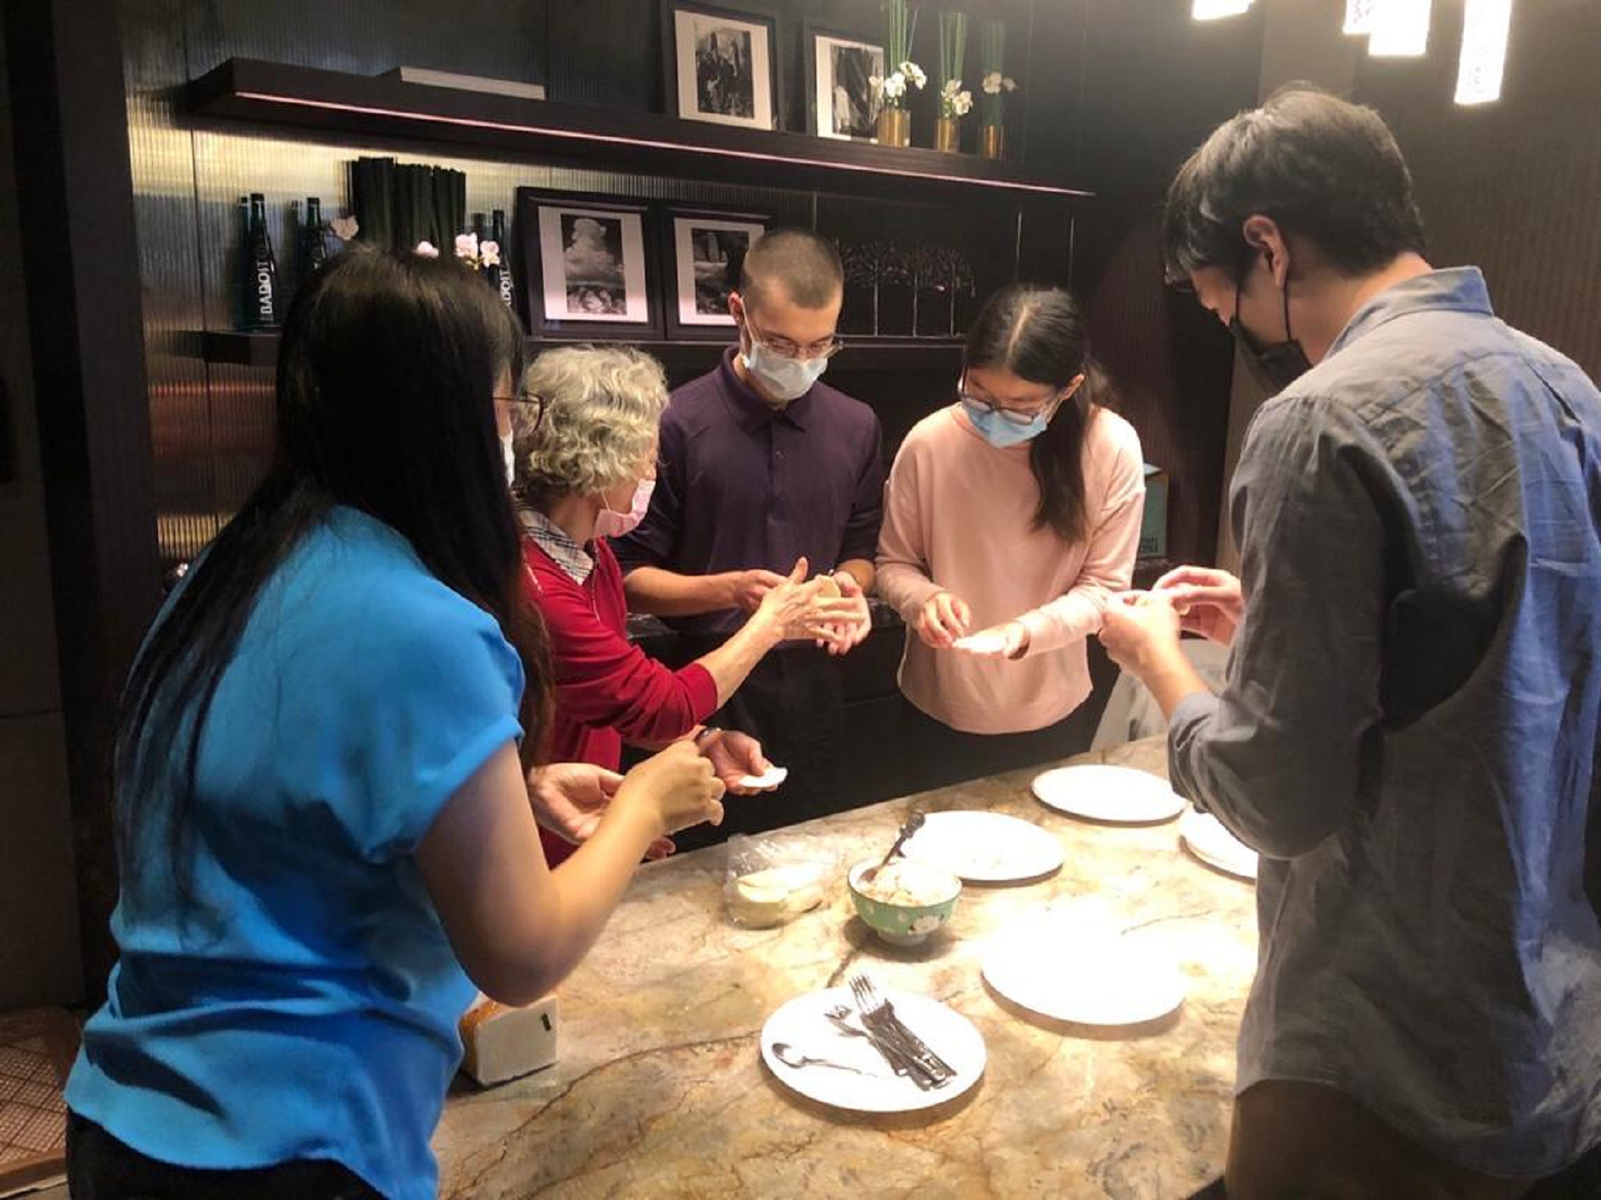 The host family provides MIT students with a wonderful Lunar New Year experience